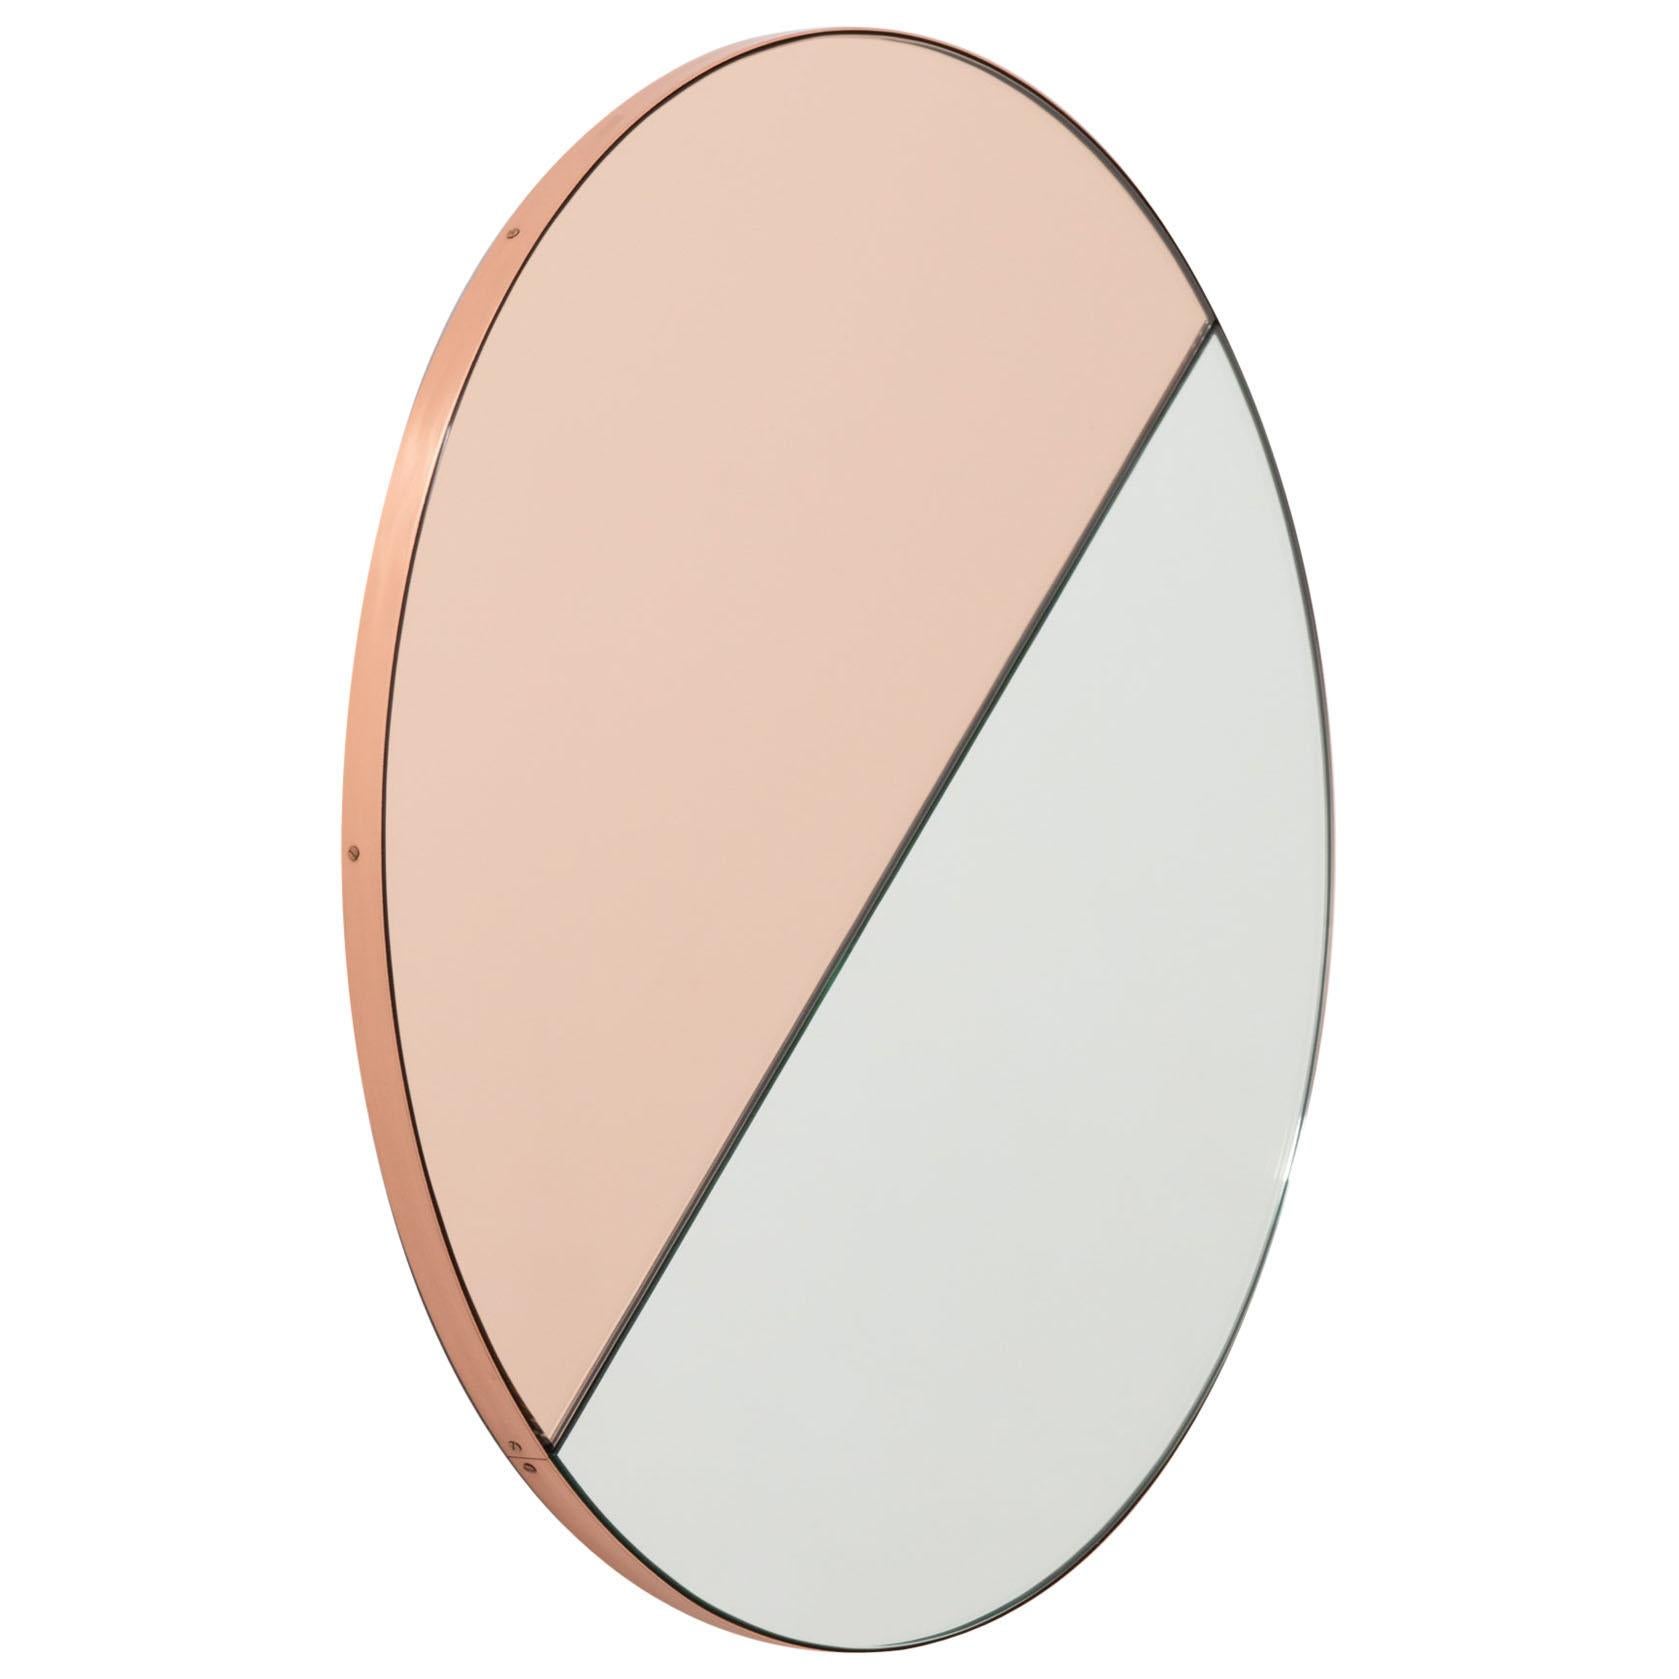 Orbis Dualis Mixed Rose Gold Tint Contemporary Round Mirror, Copper Frame, Small For Sale